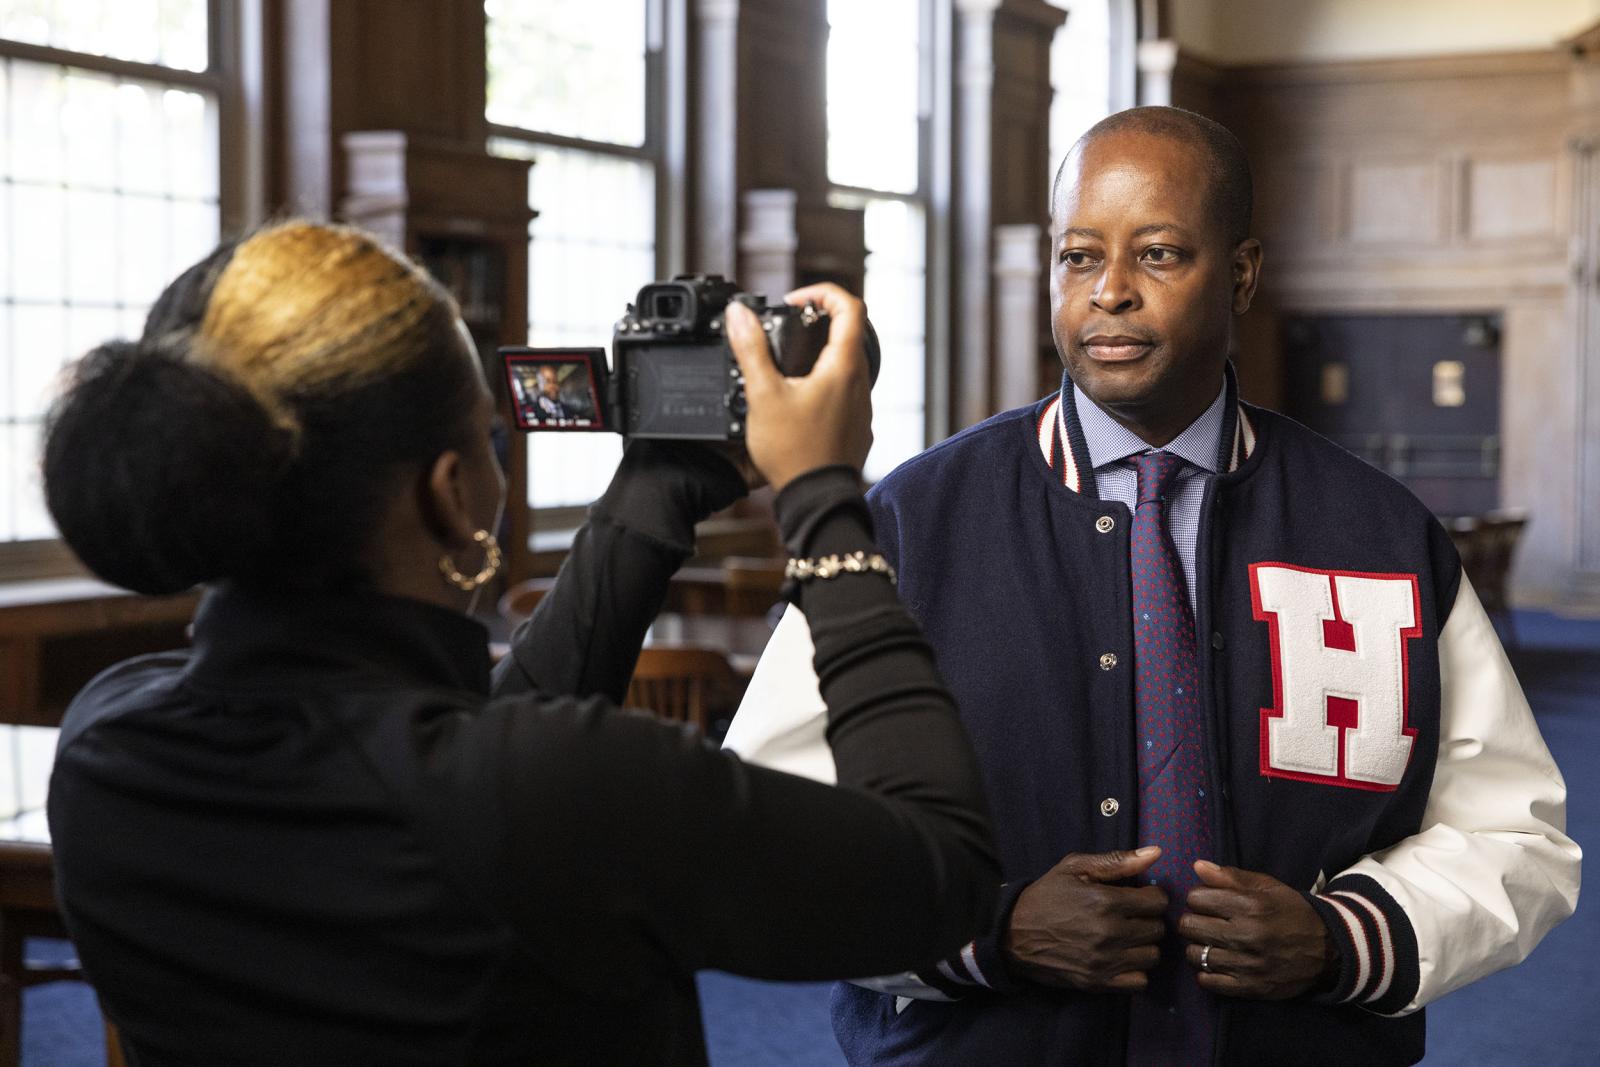 Dr. Frederick in letterman jacket with camera recording